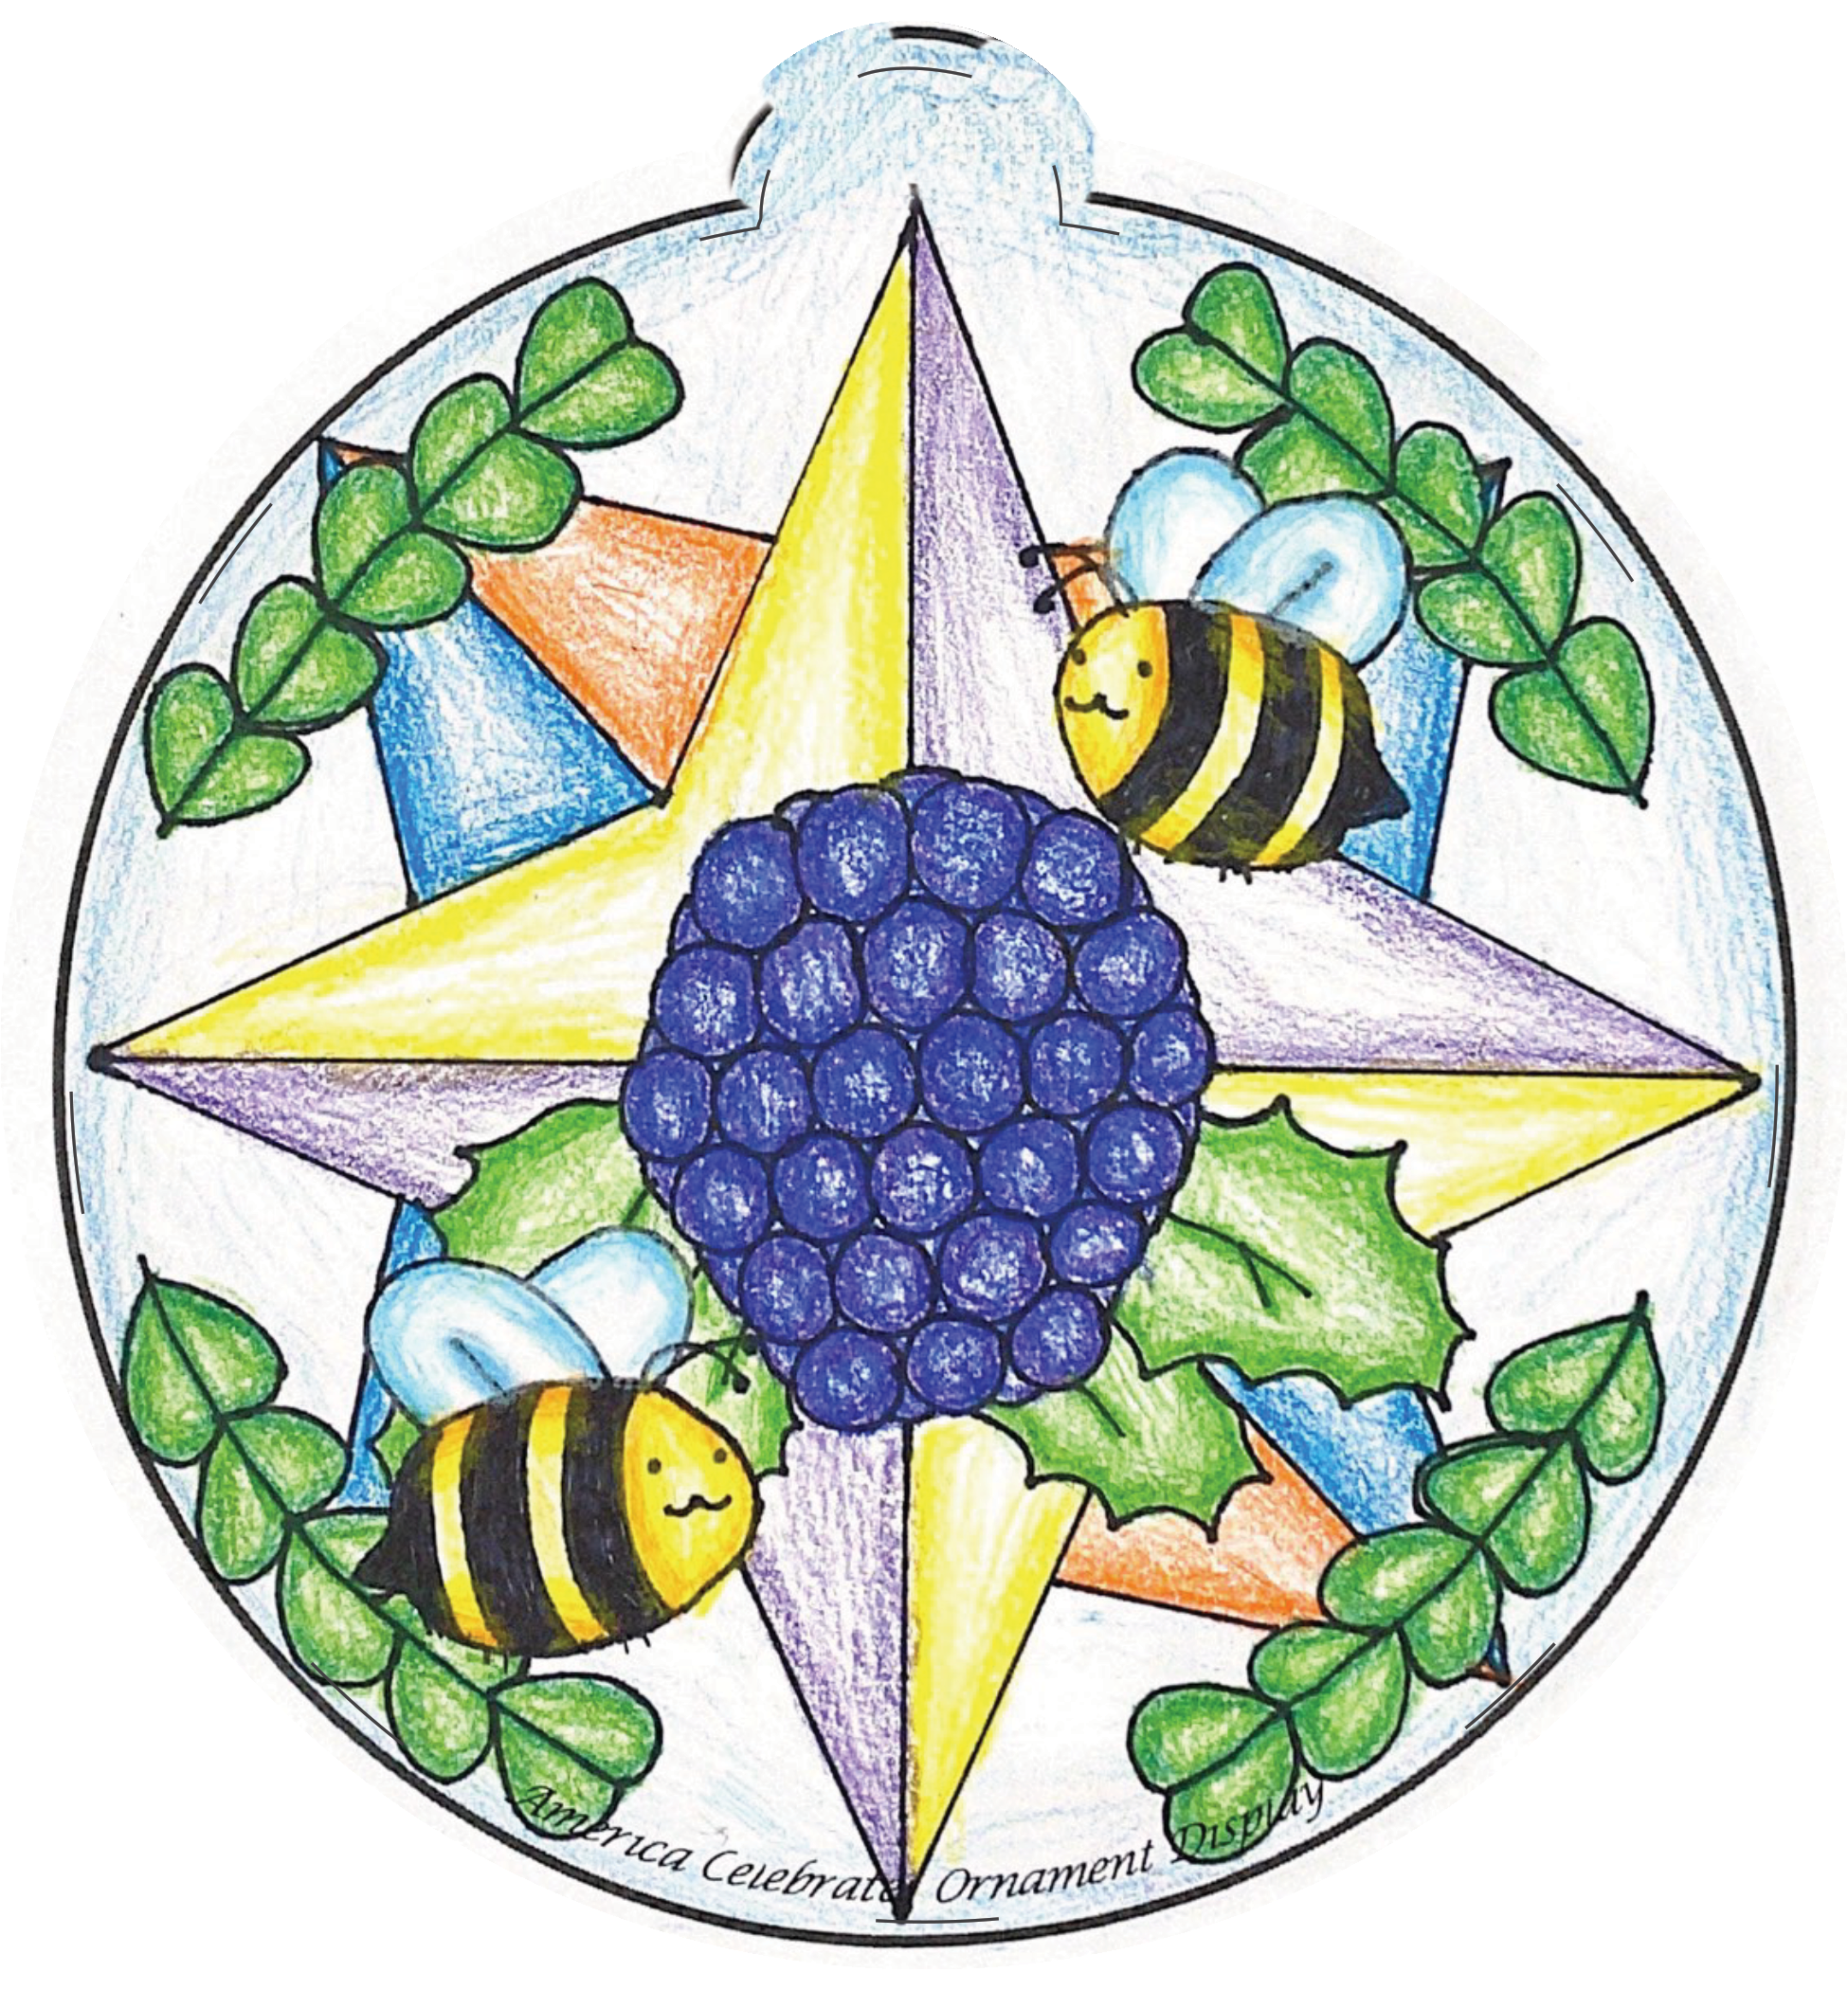 Ornament depicting a blueberry and bumblebees